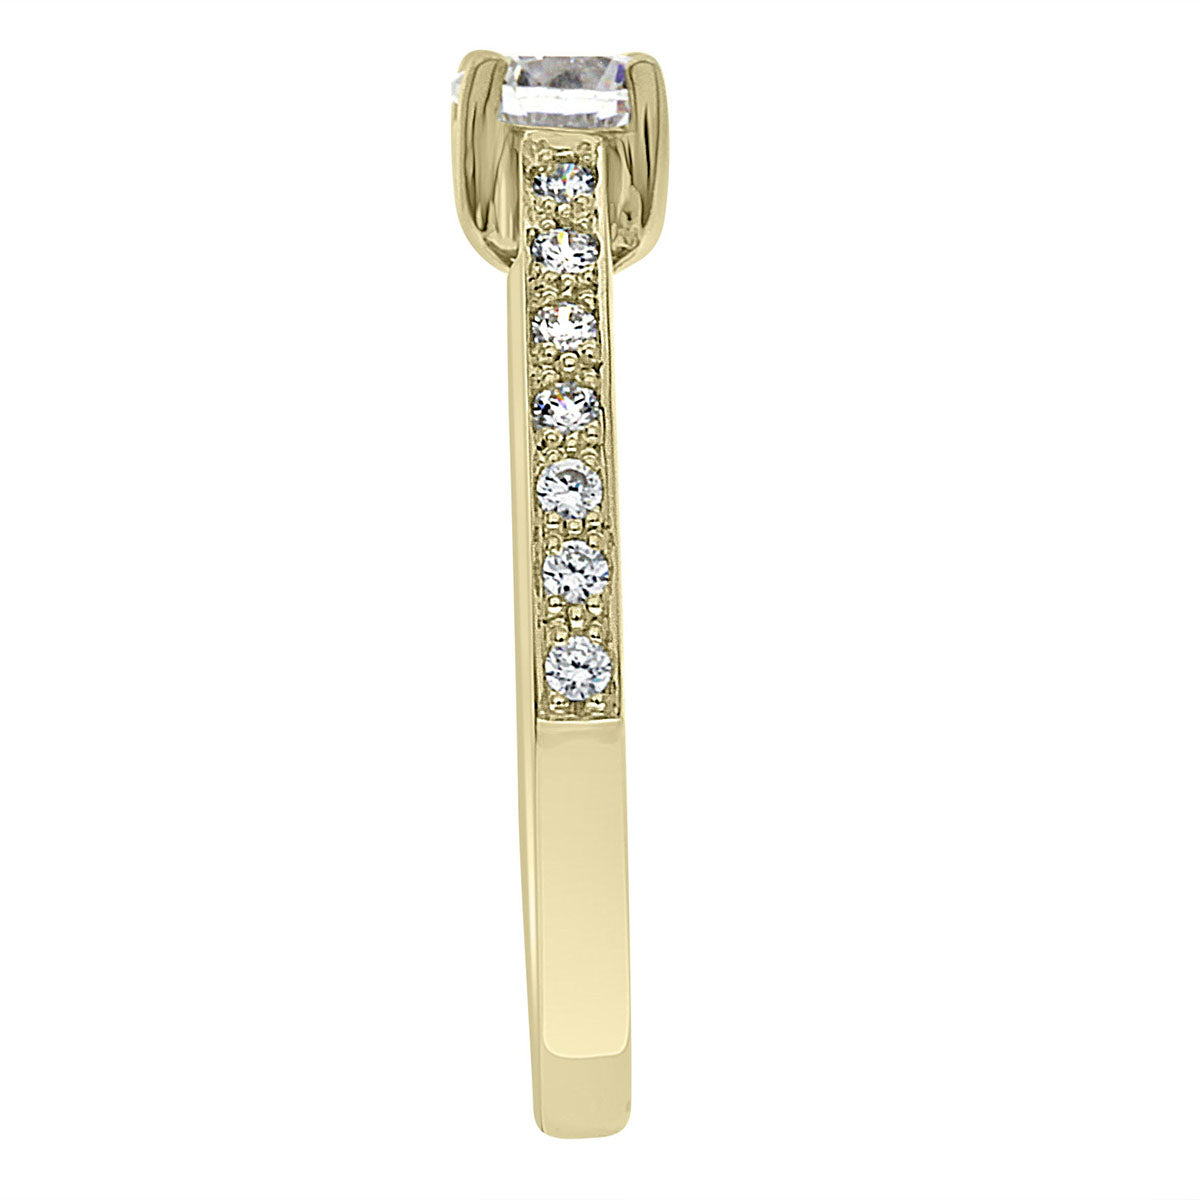 Princess Cut Bezel Ring set in yellow gold viewed from the side